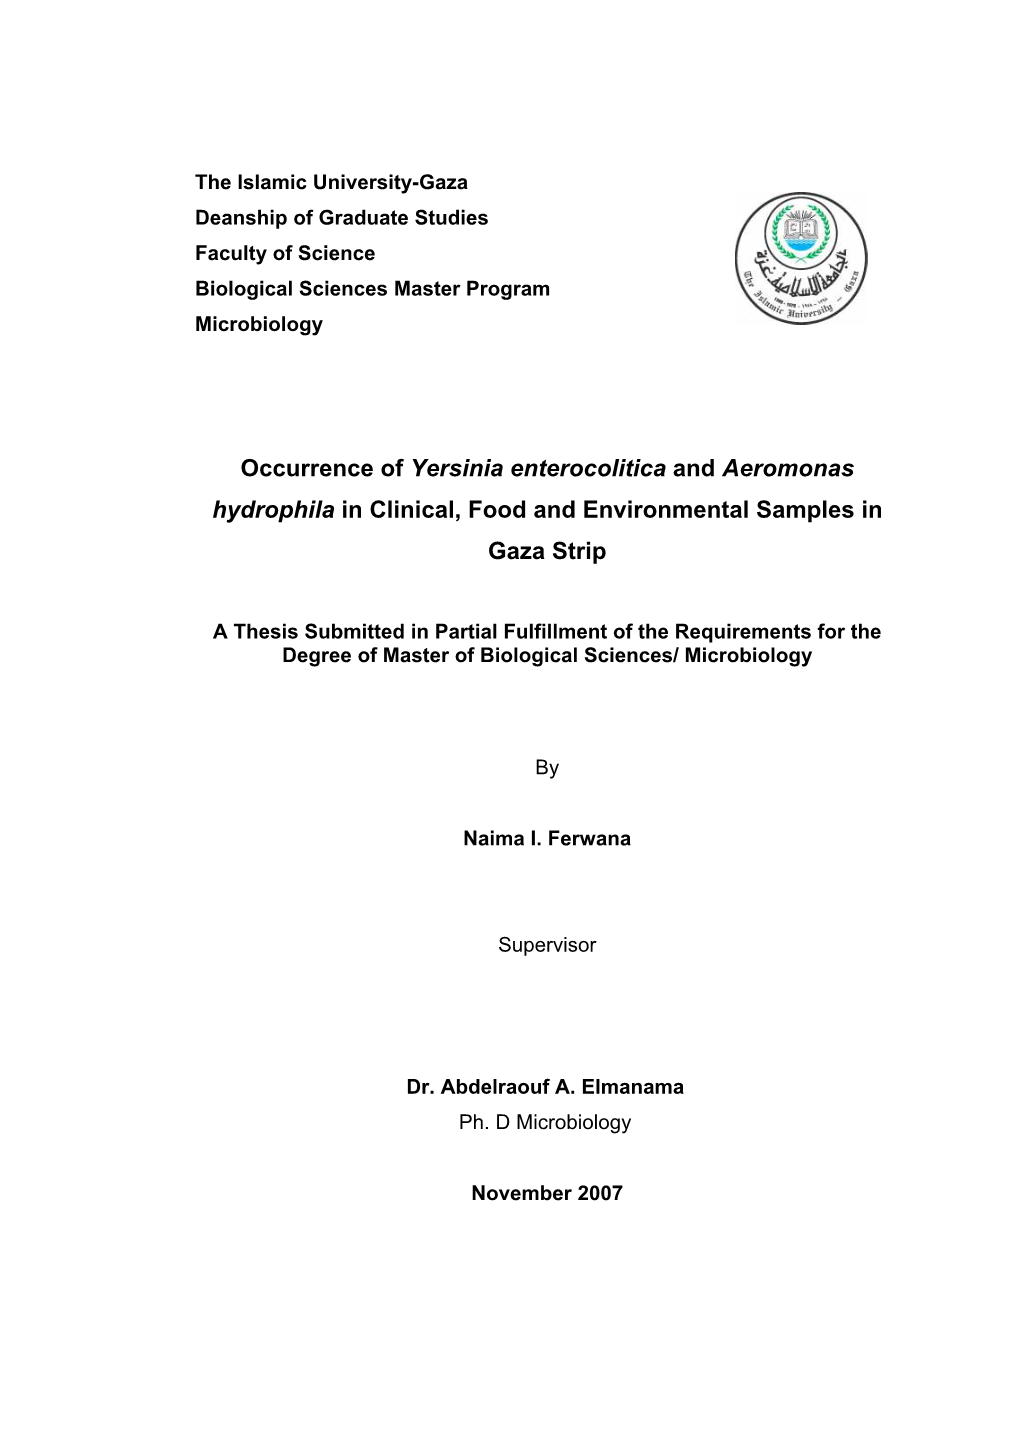 Occurrence of Yersinia Enterocolitica and Aeromonas Hydrophila in Clinical, Food and Environmental Samples in Gaza Strip